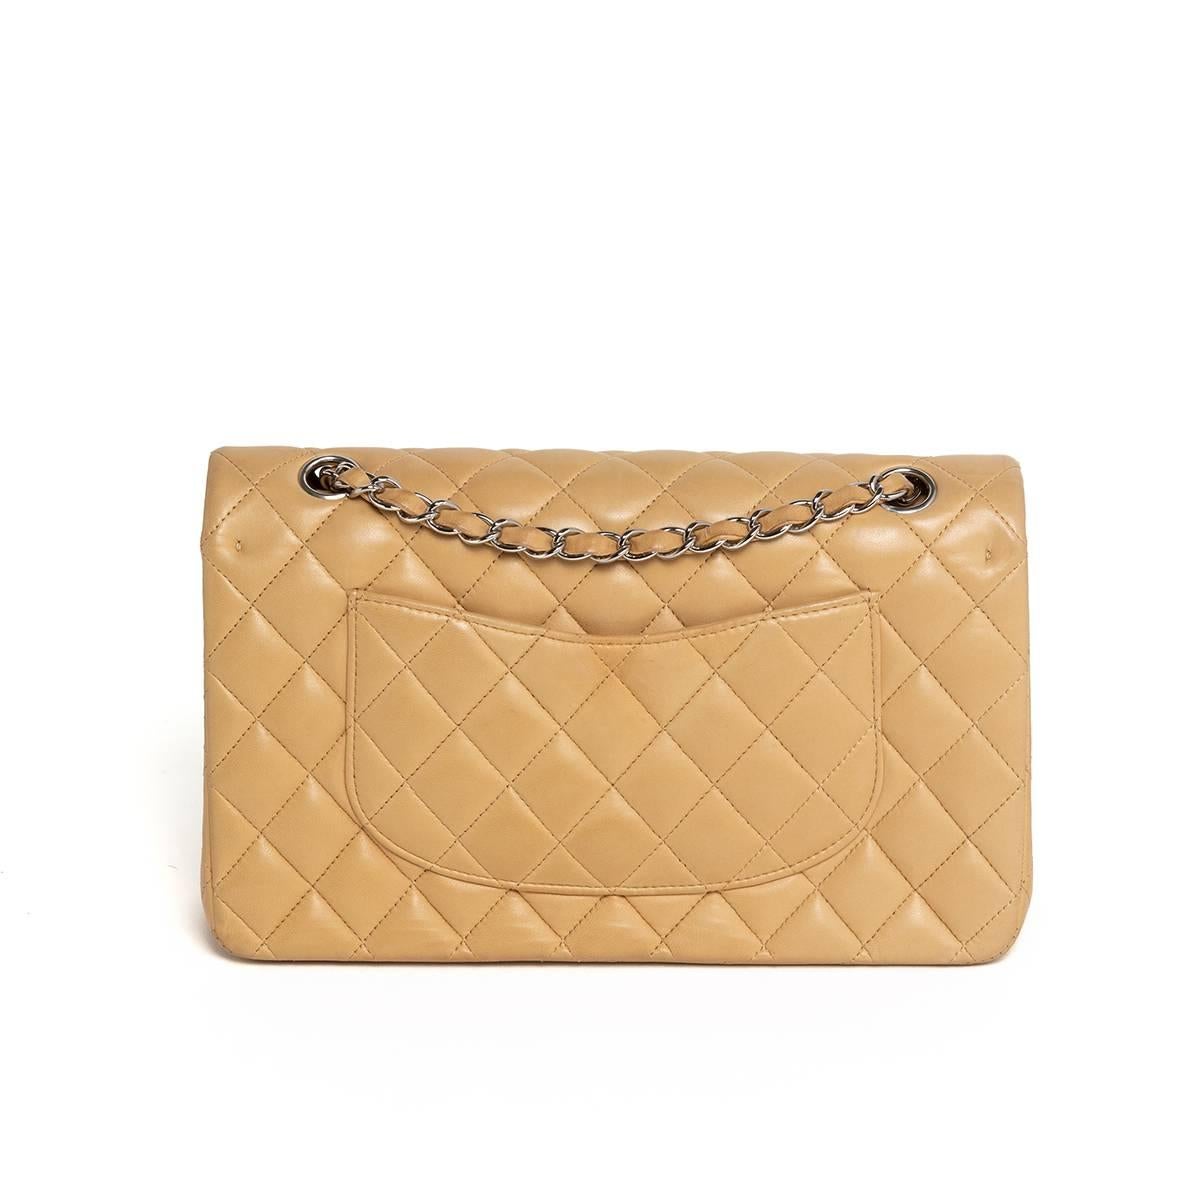 2005 Chanel 2.55 Quilted Matelasse Beige Lambskin  In Excellent Condition For Sale In Bologna, Emilia Romagna